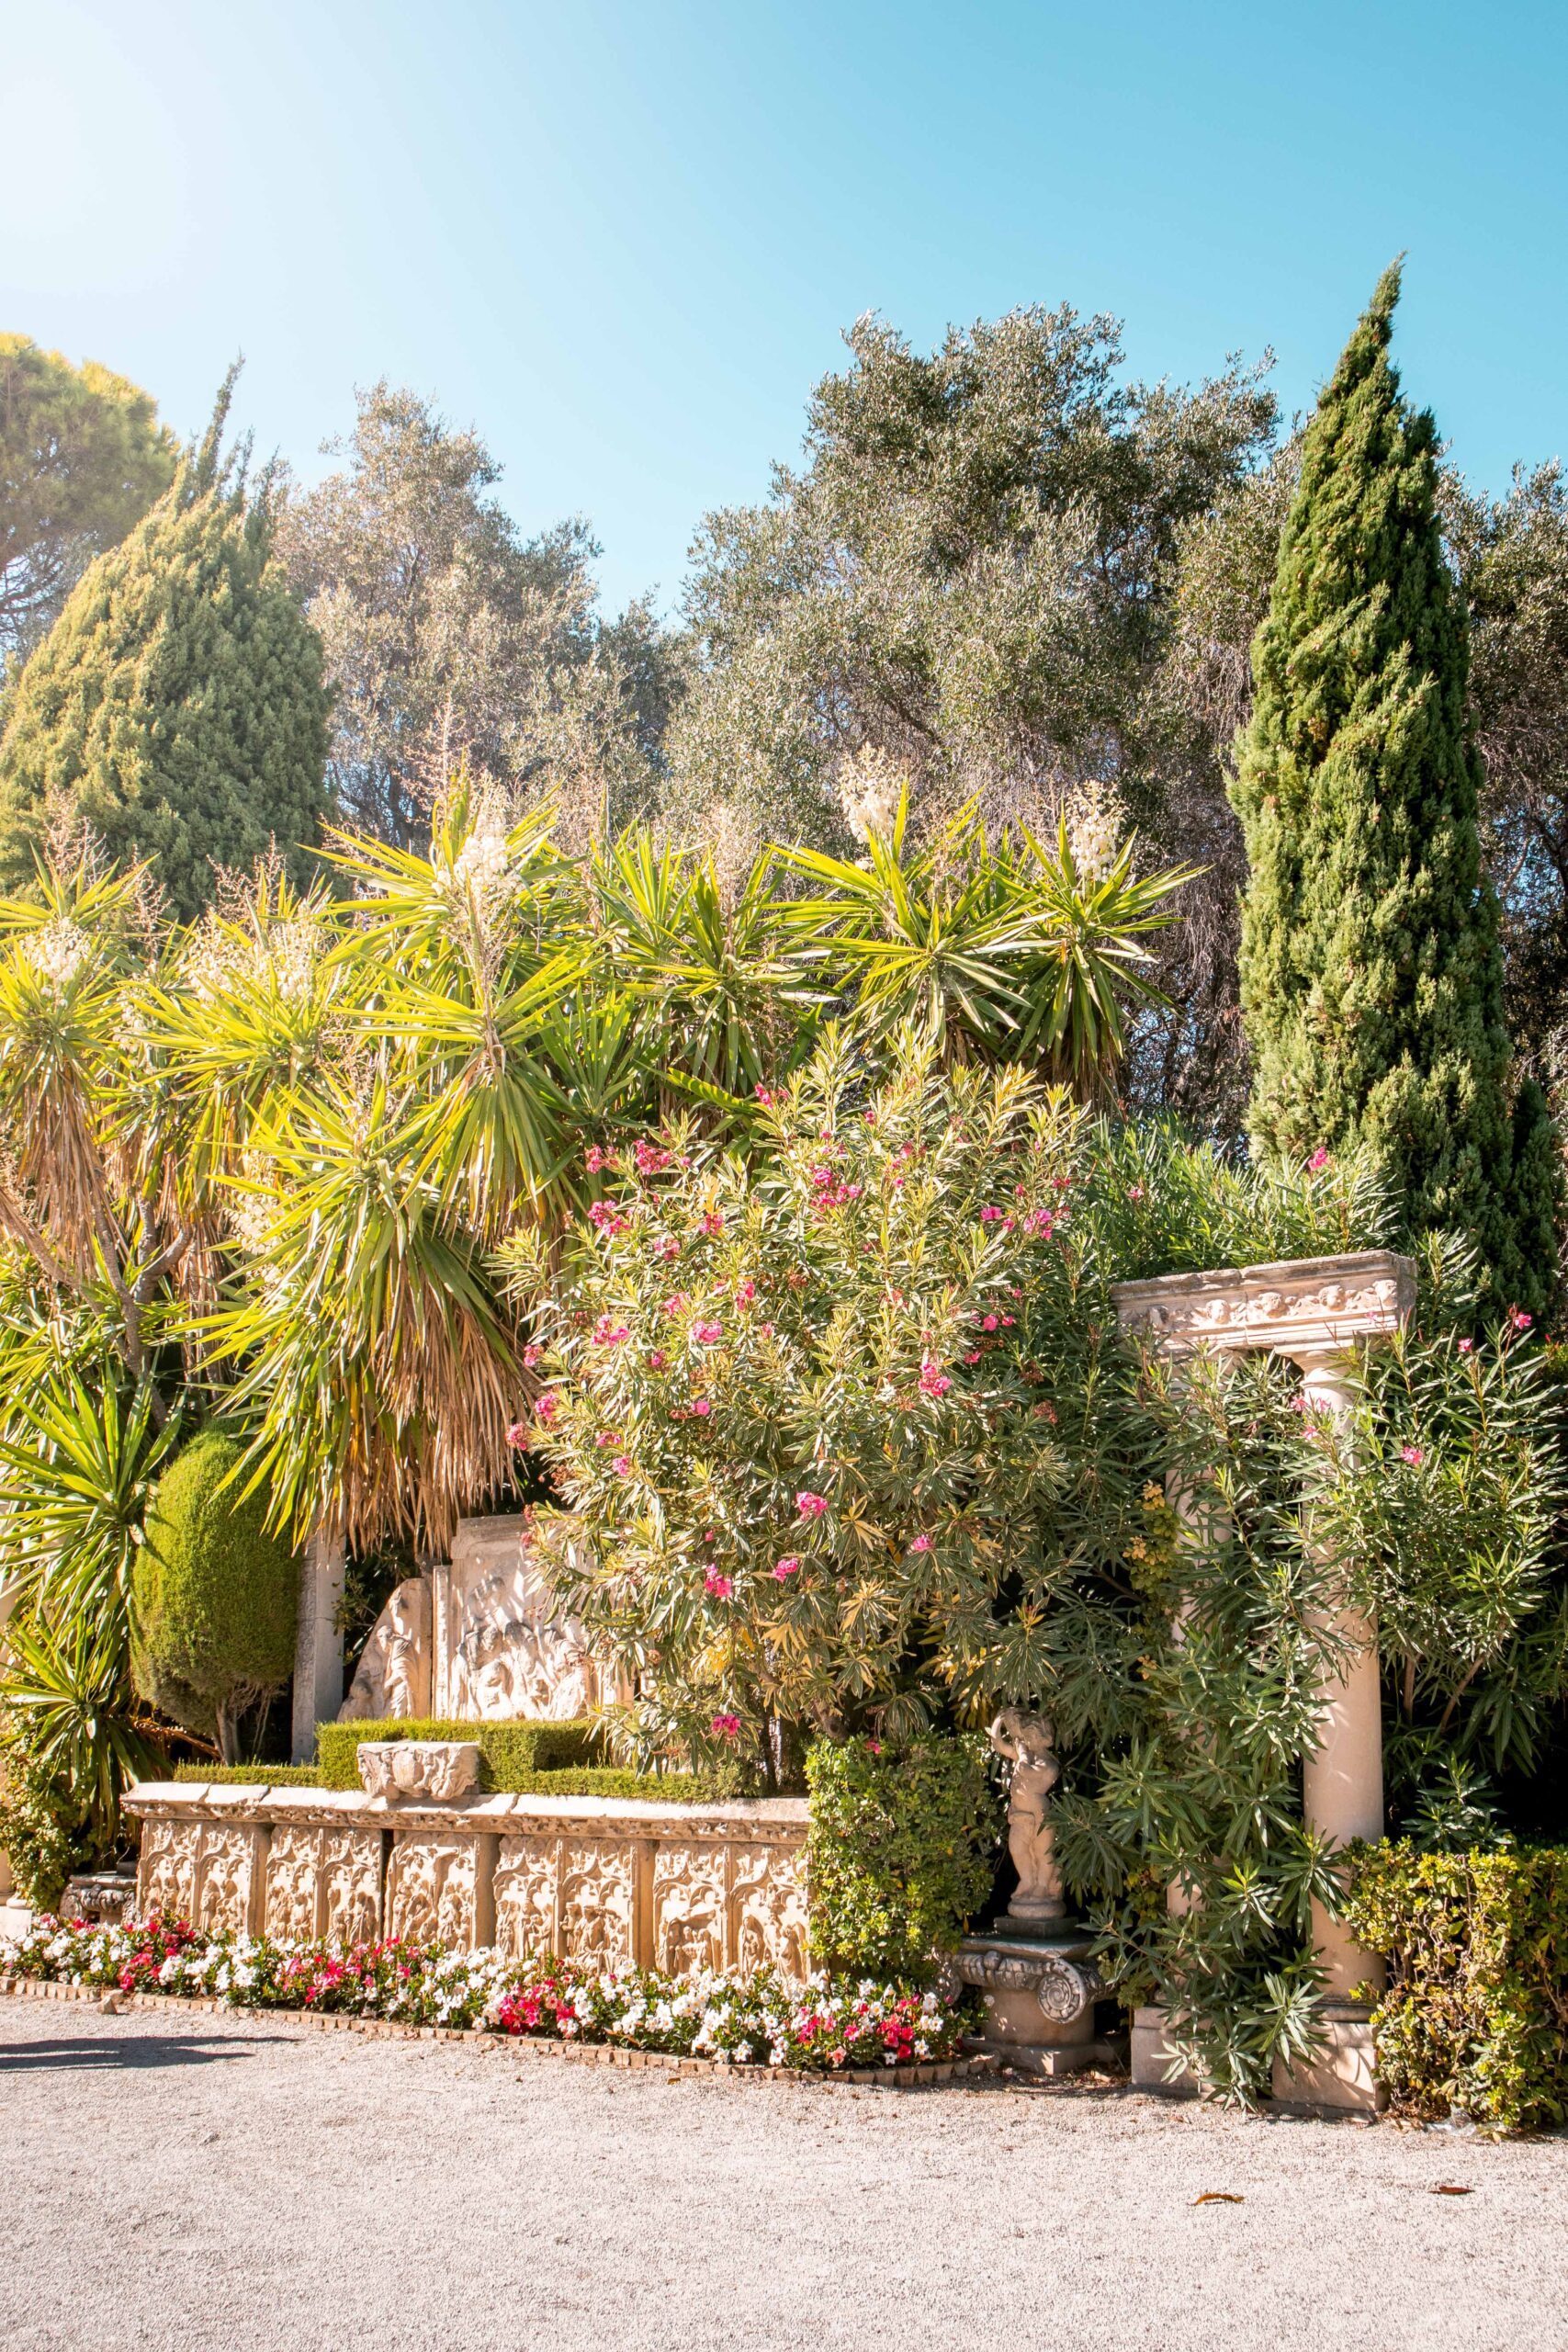 Details of the entrance of the Gardens and Villa Ephrussi de Rothschild with vegetation and Ancient Roman artworks in Saint-Jean-Cap-Ferrat, France